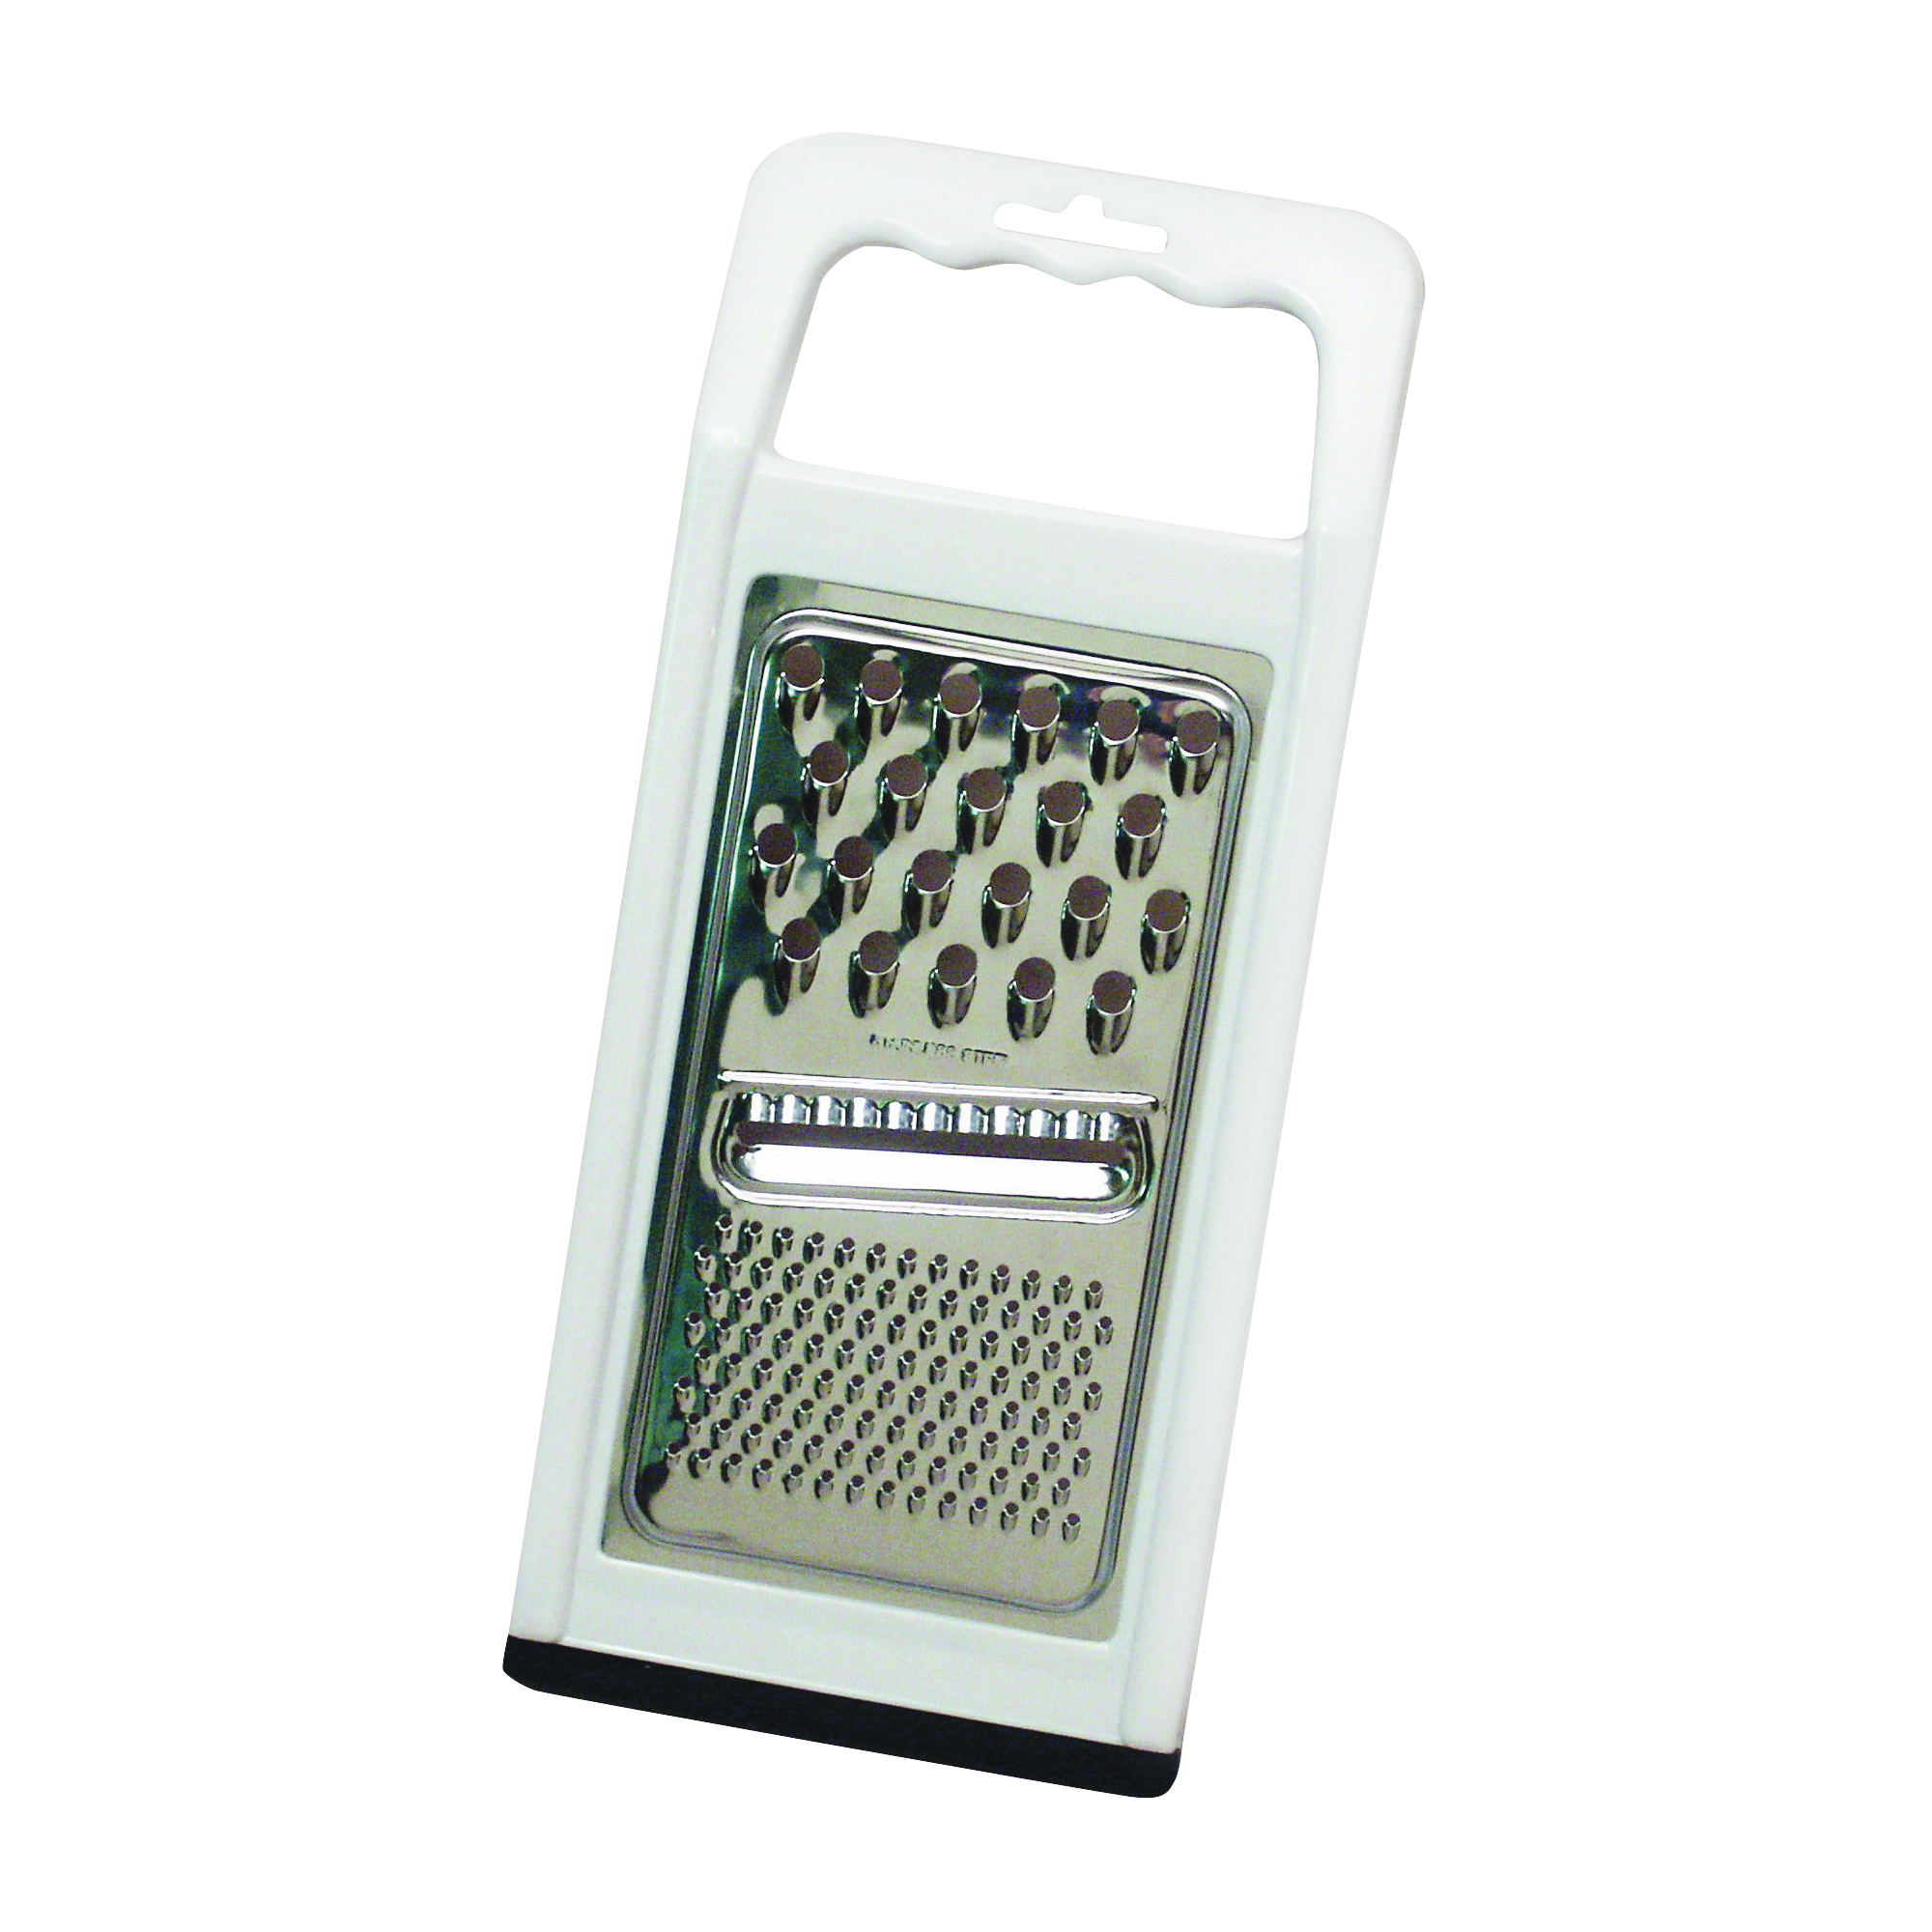 Chef Craft 21005 Grater, Plastic/Stainless Steel, White